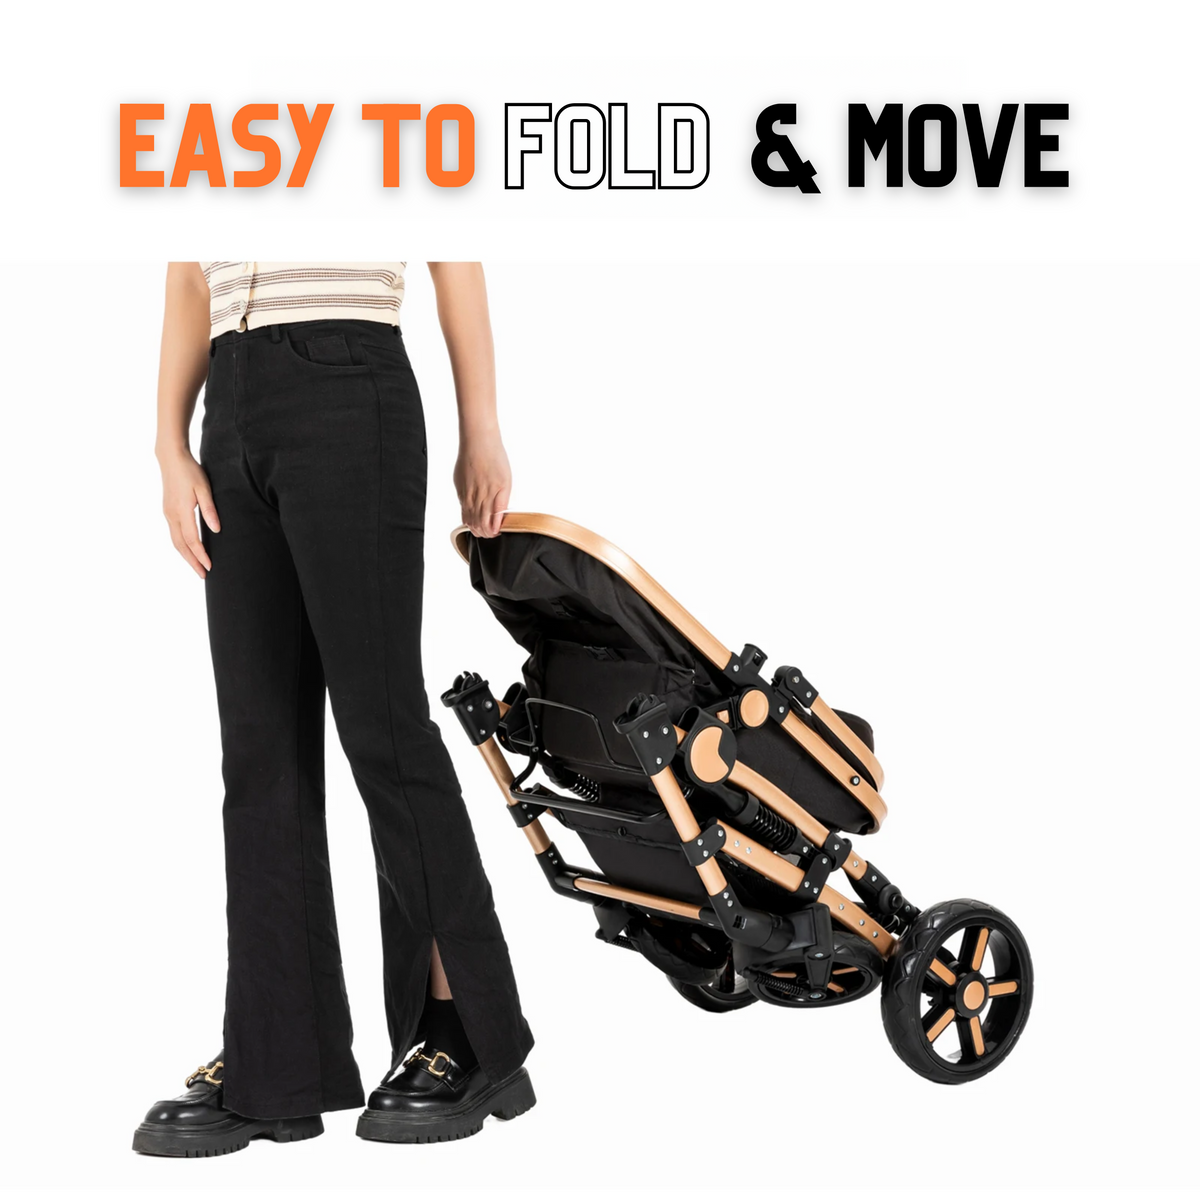 Easy to fold & move